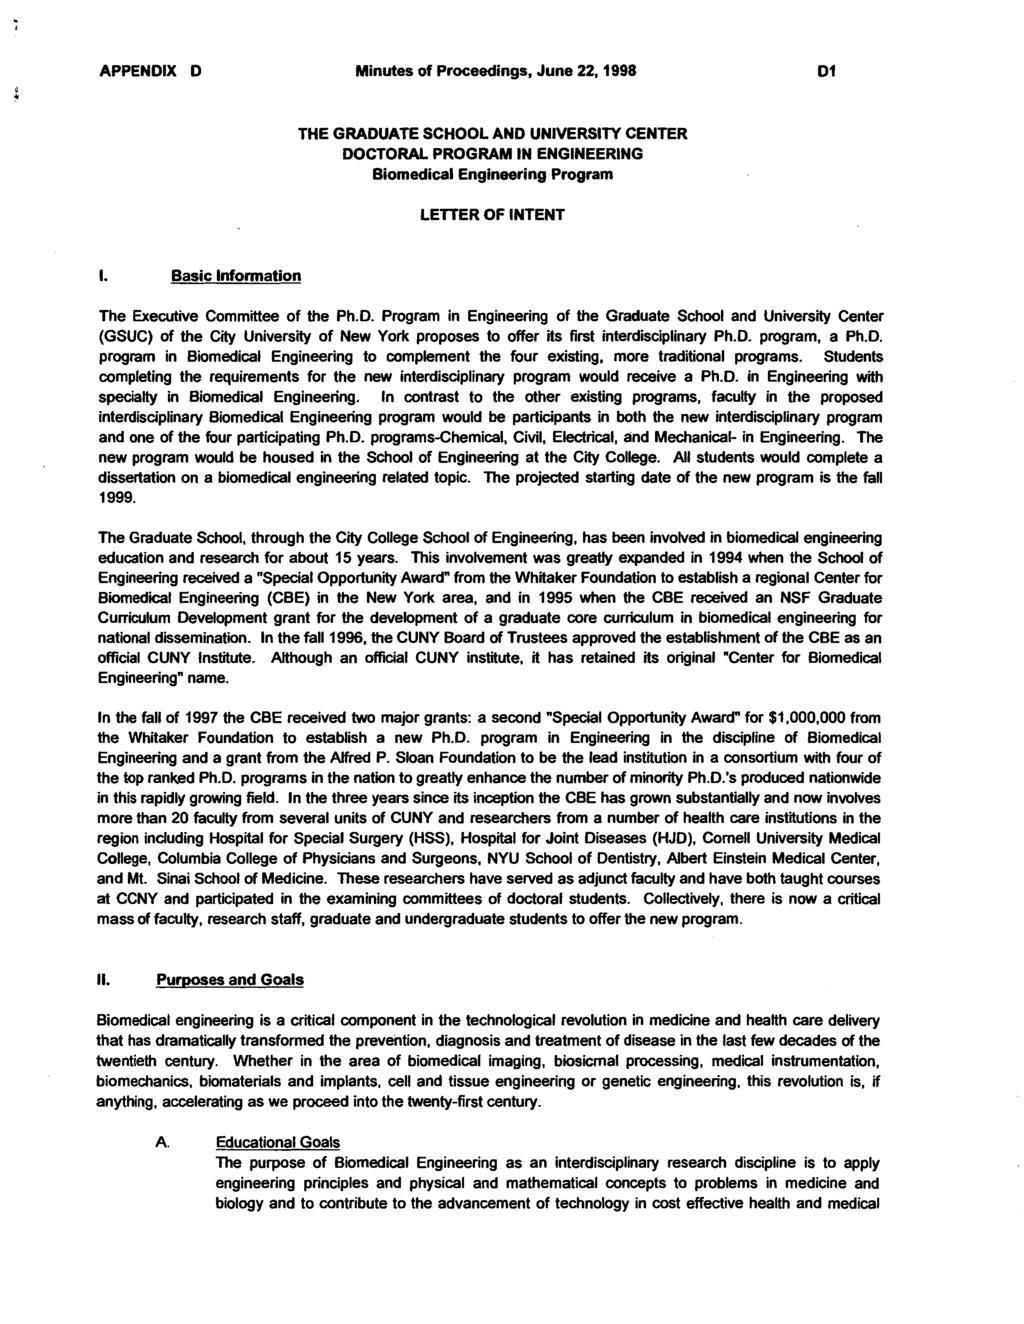 1 t APPENDIX D Minutes of Proceedings, June 22,1998 THE GRADUATE SCHOOL AND UNIVERSITY CENTER DOCTORAL PROGRAM IN ENGINEERING Biomedical Engineering Program LElTER OF INTENT 1.